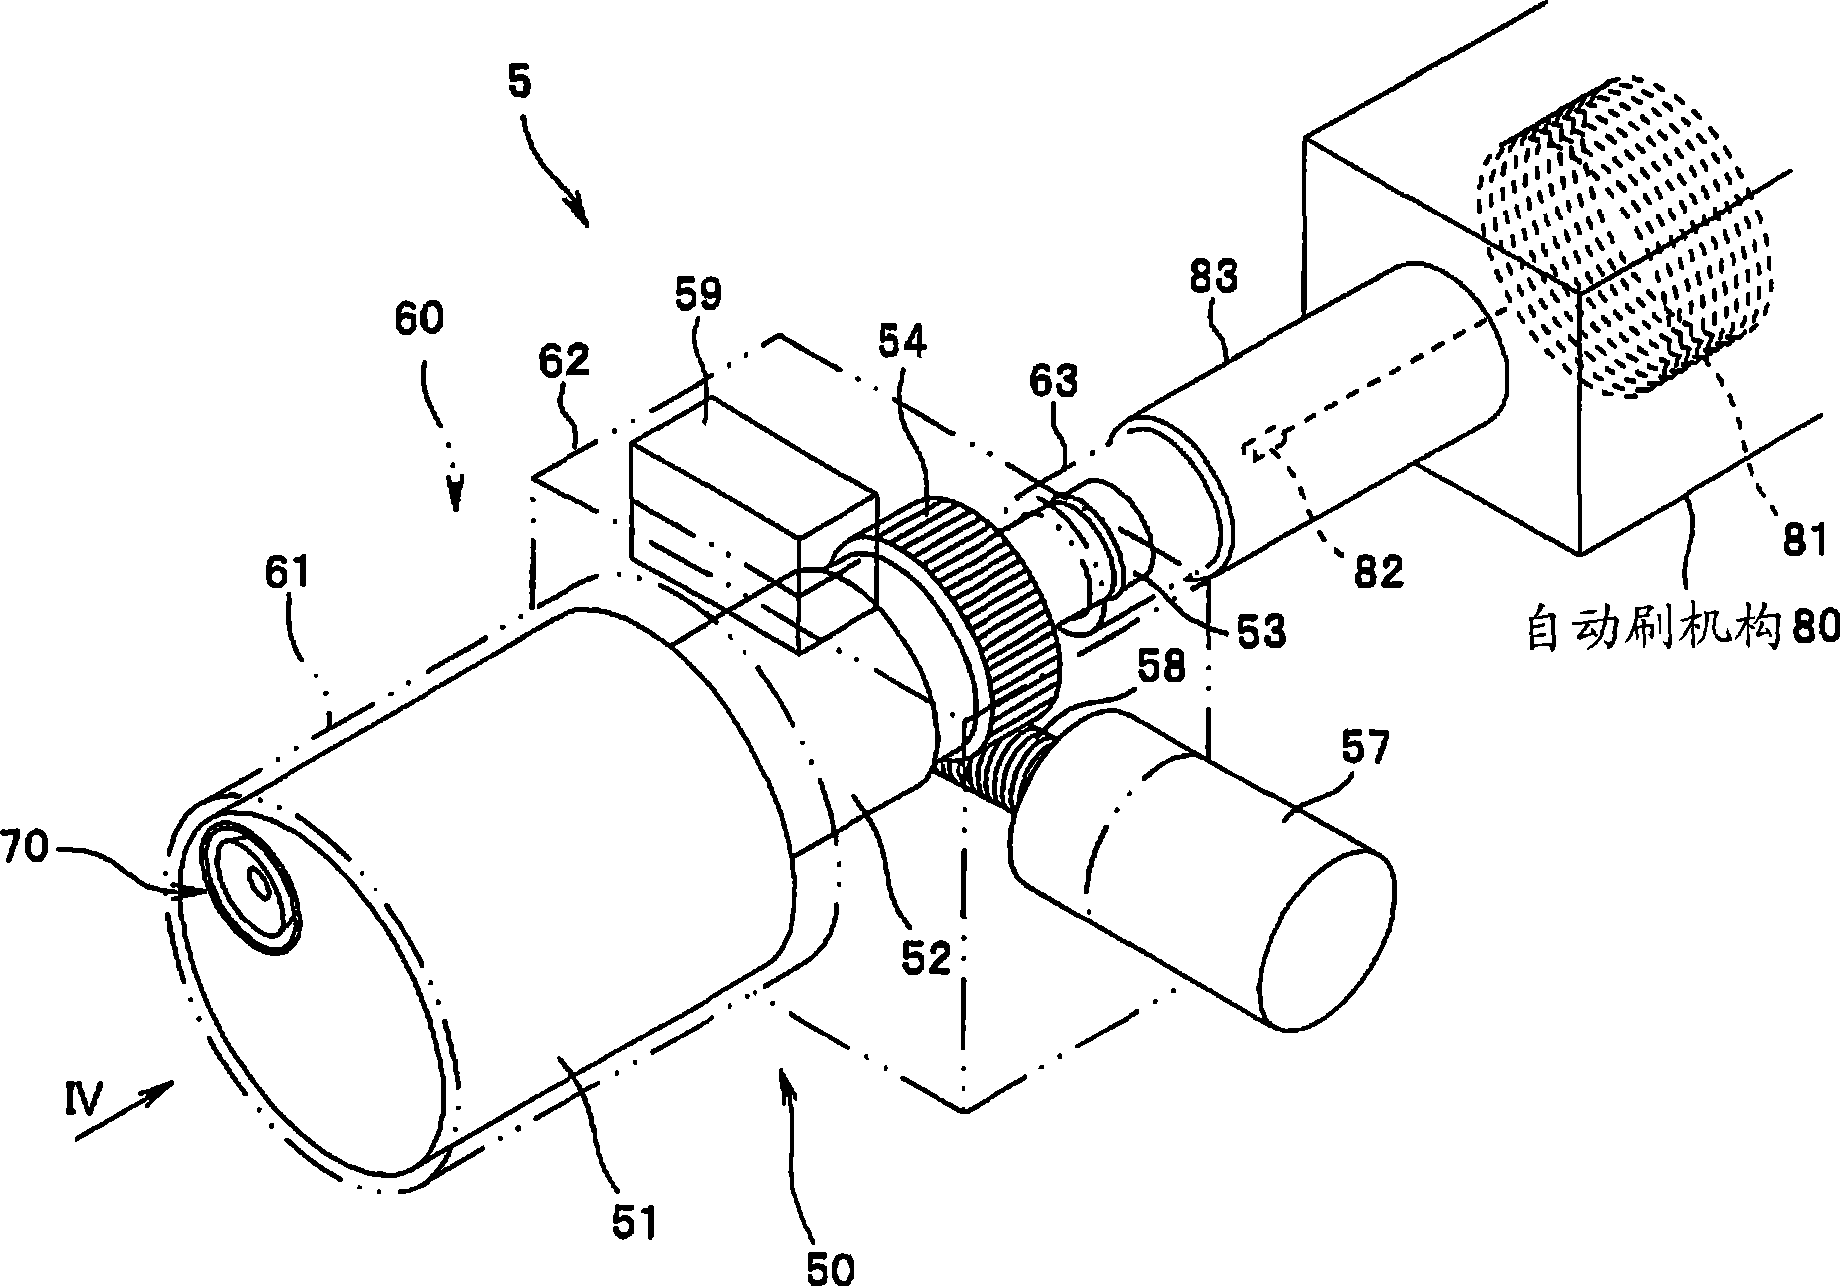 Endoscope washing and disinfecting apparatus